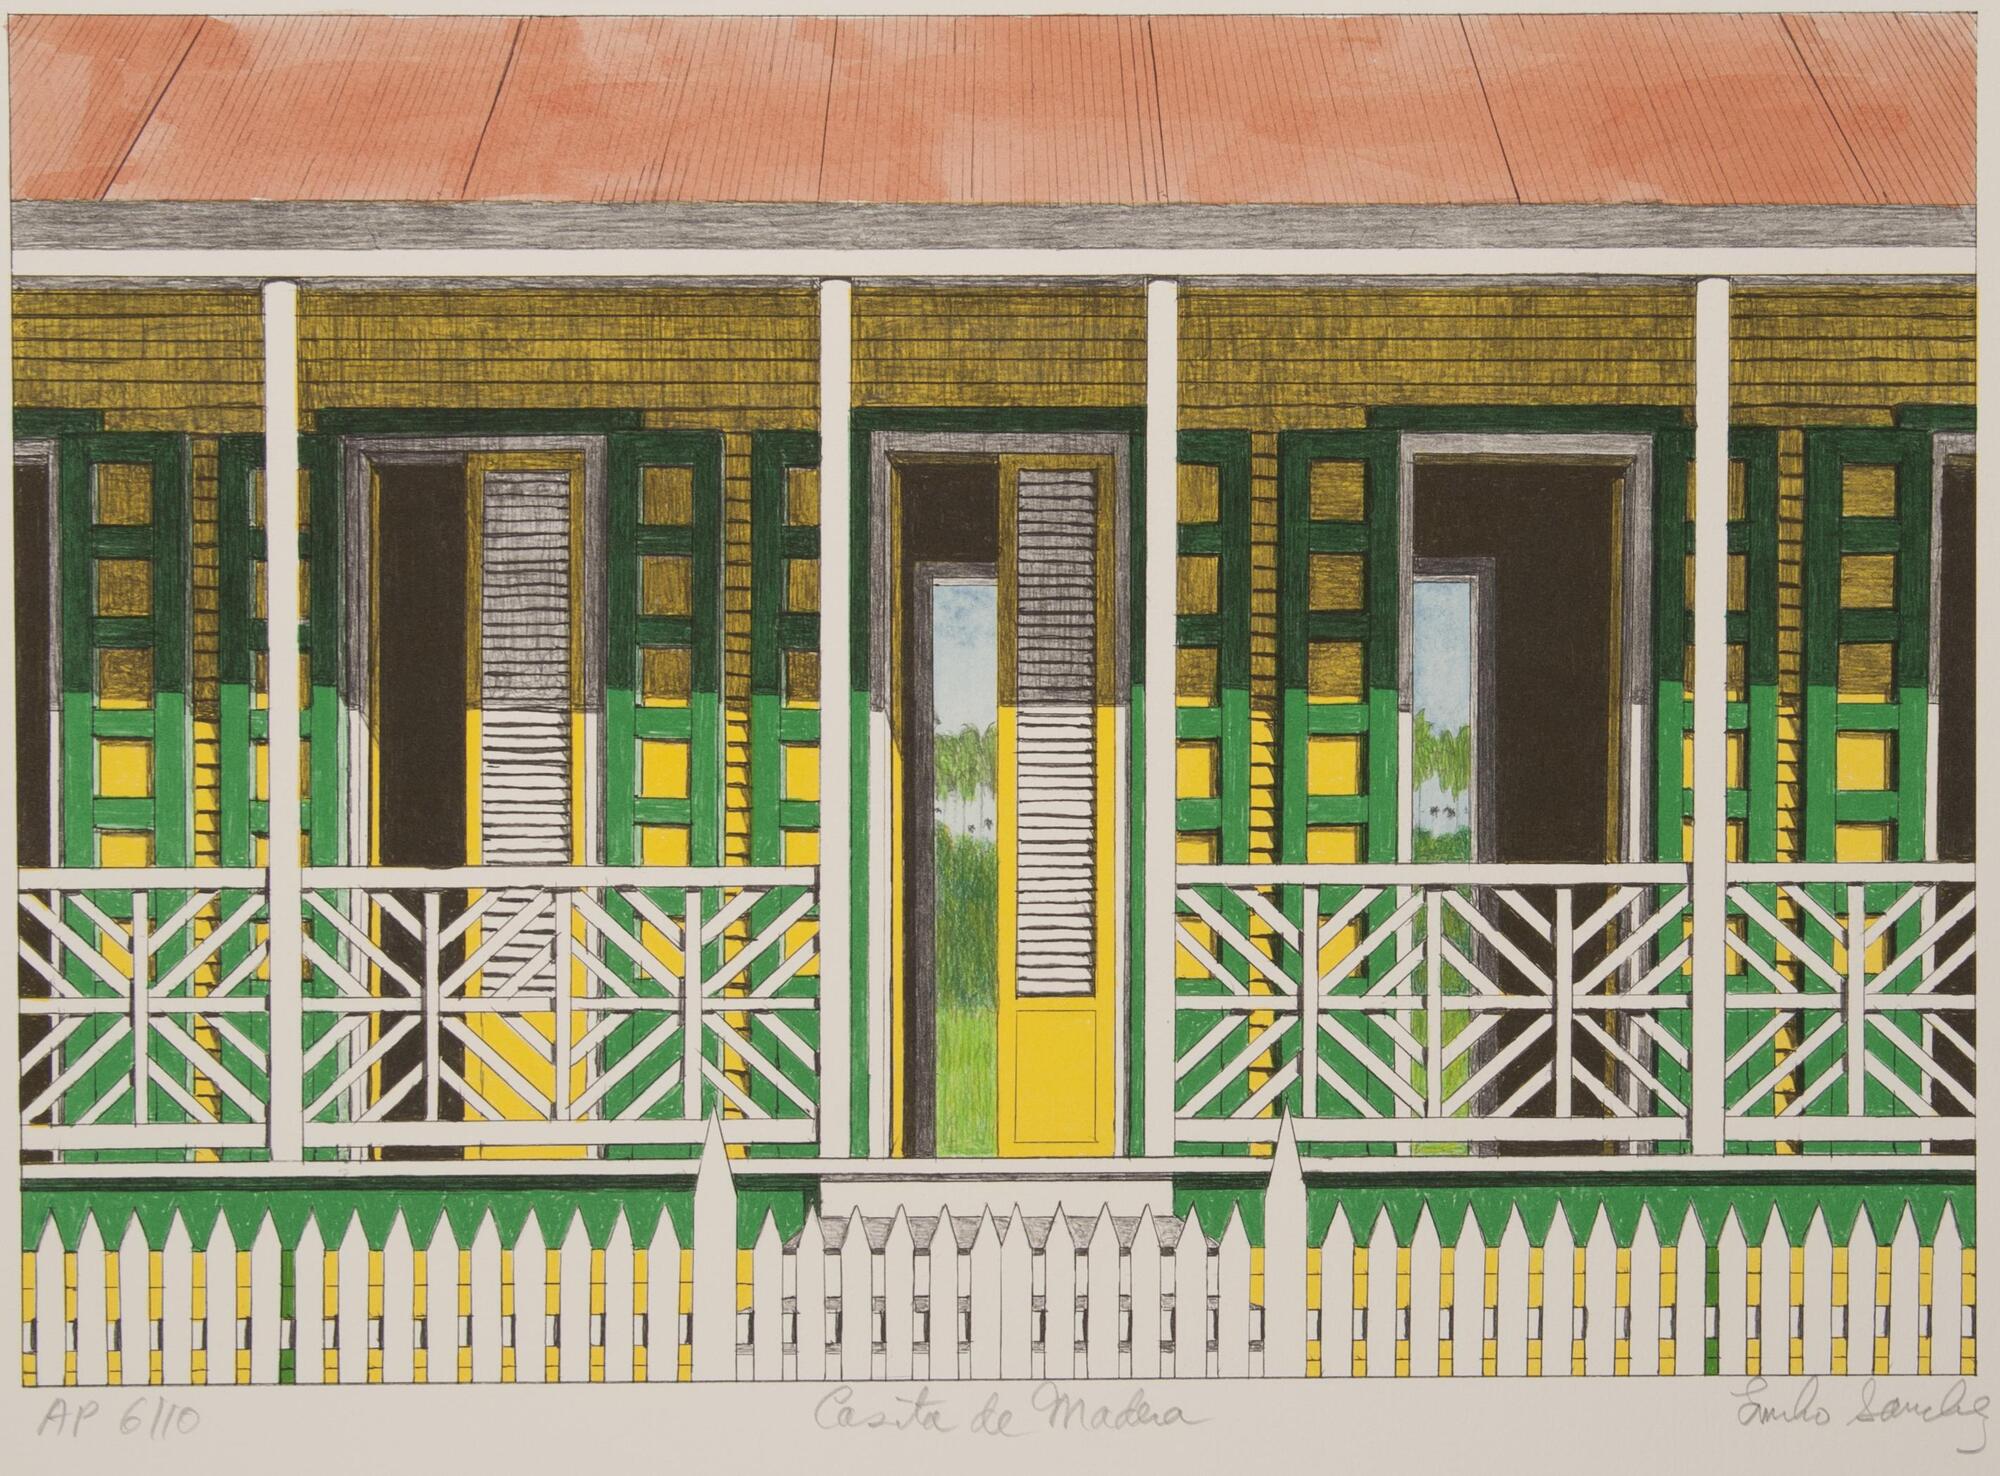 A color print of a house with open doors and shutters. The view through one of the doors is of palm trees. In front of the house is a white picket fence.